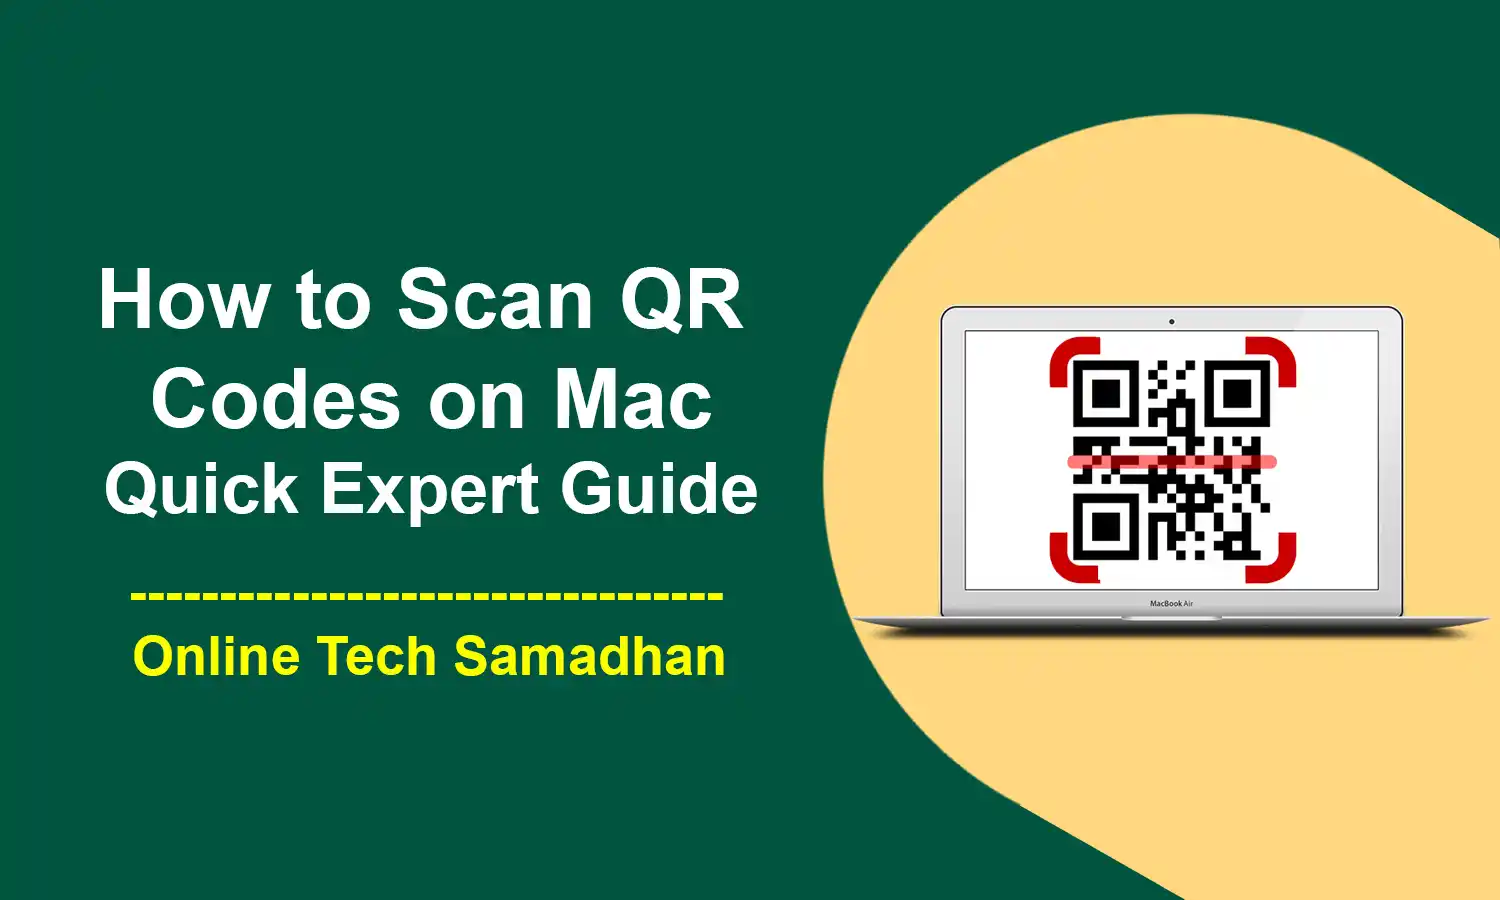 How to Scan QR Codes on Mac